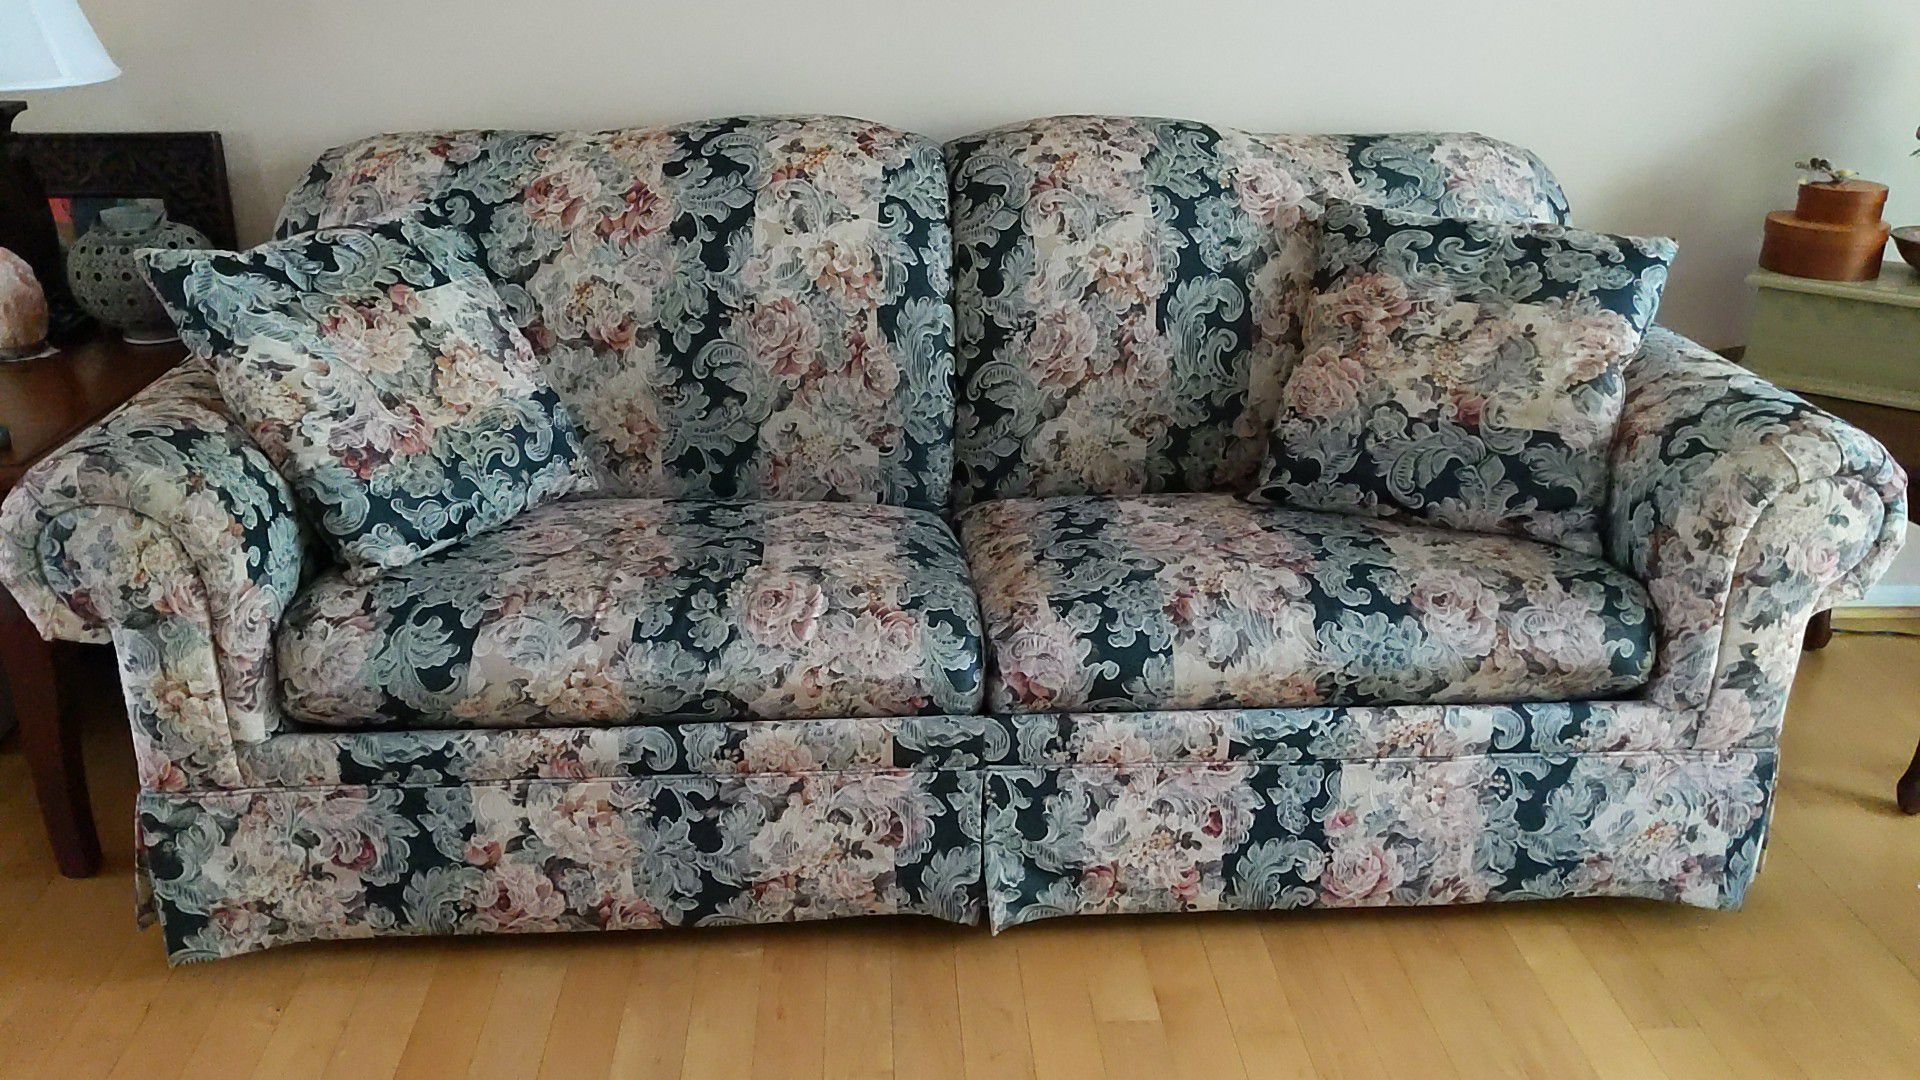 FREE couch and chair